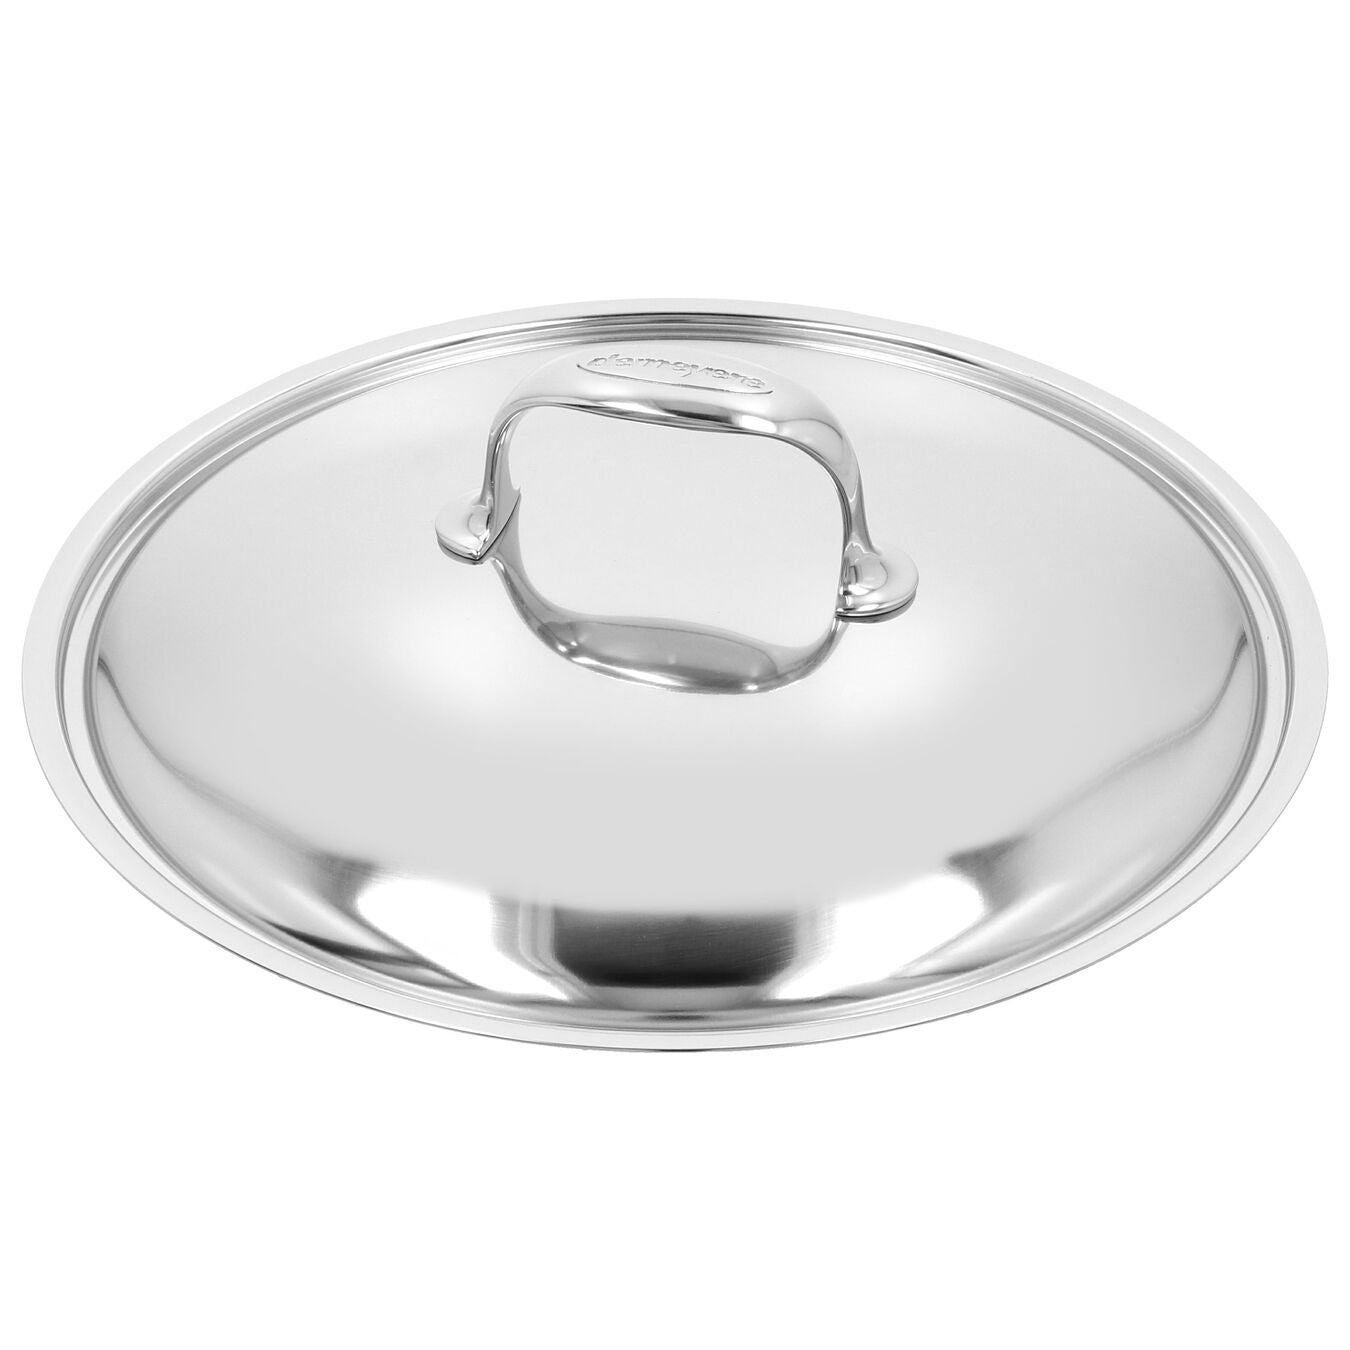 Demeyere Atlantis 7 Collection 8.4L 18/10 Stainless Steel Dutch Oven Lid